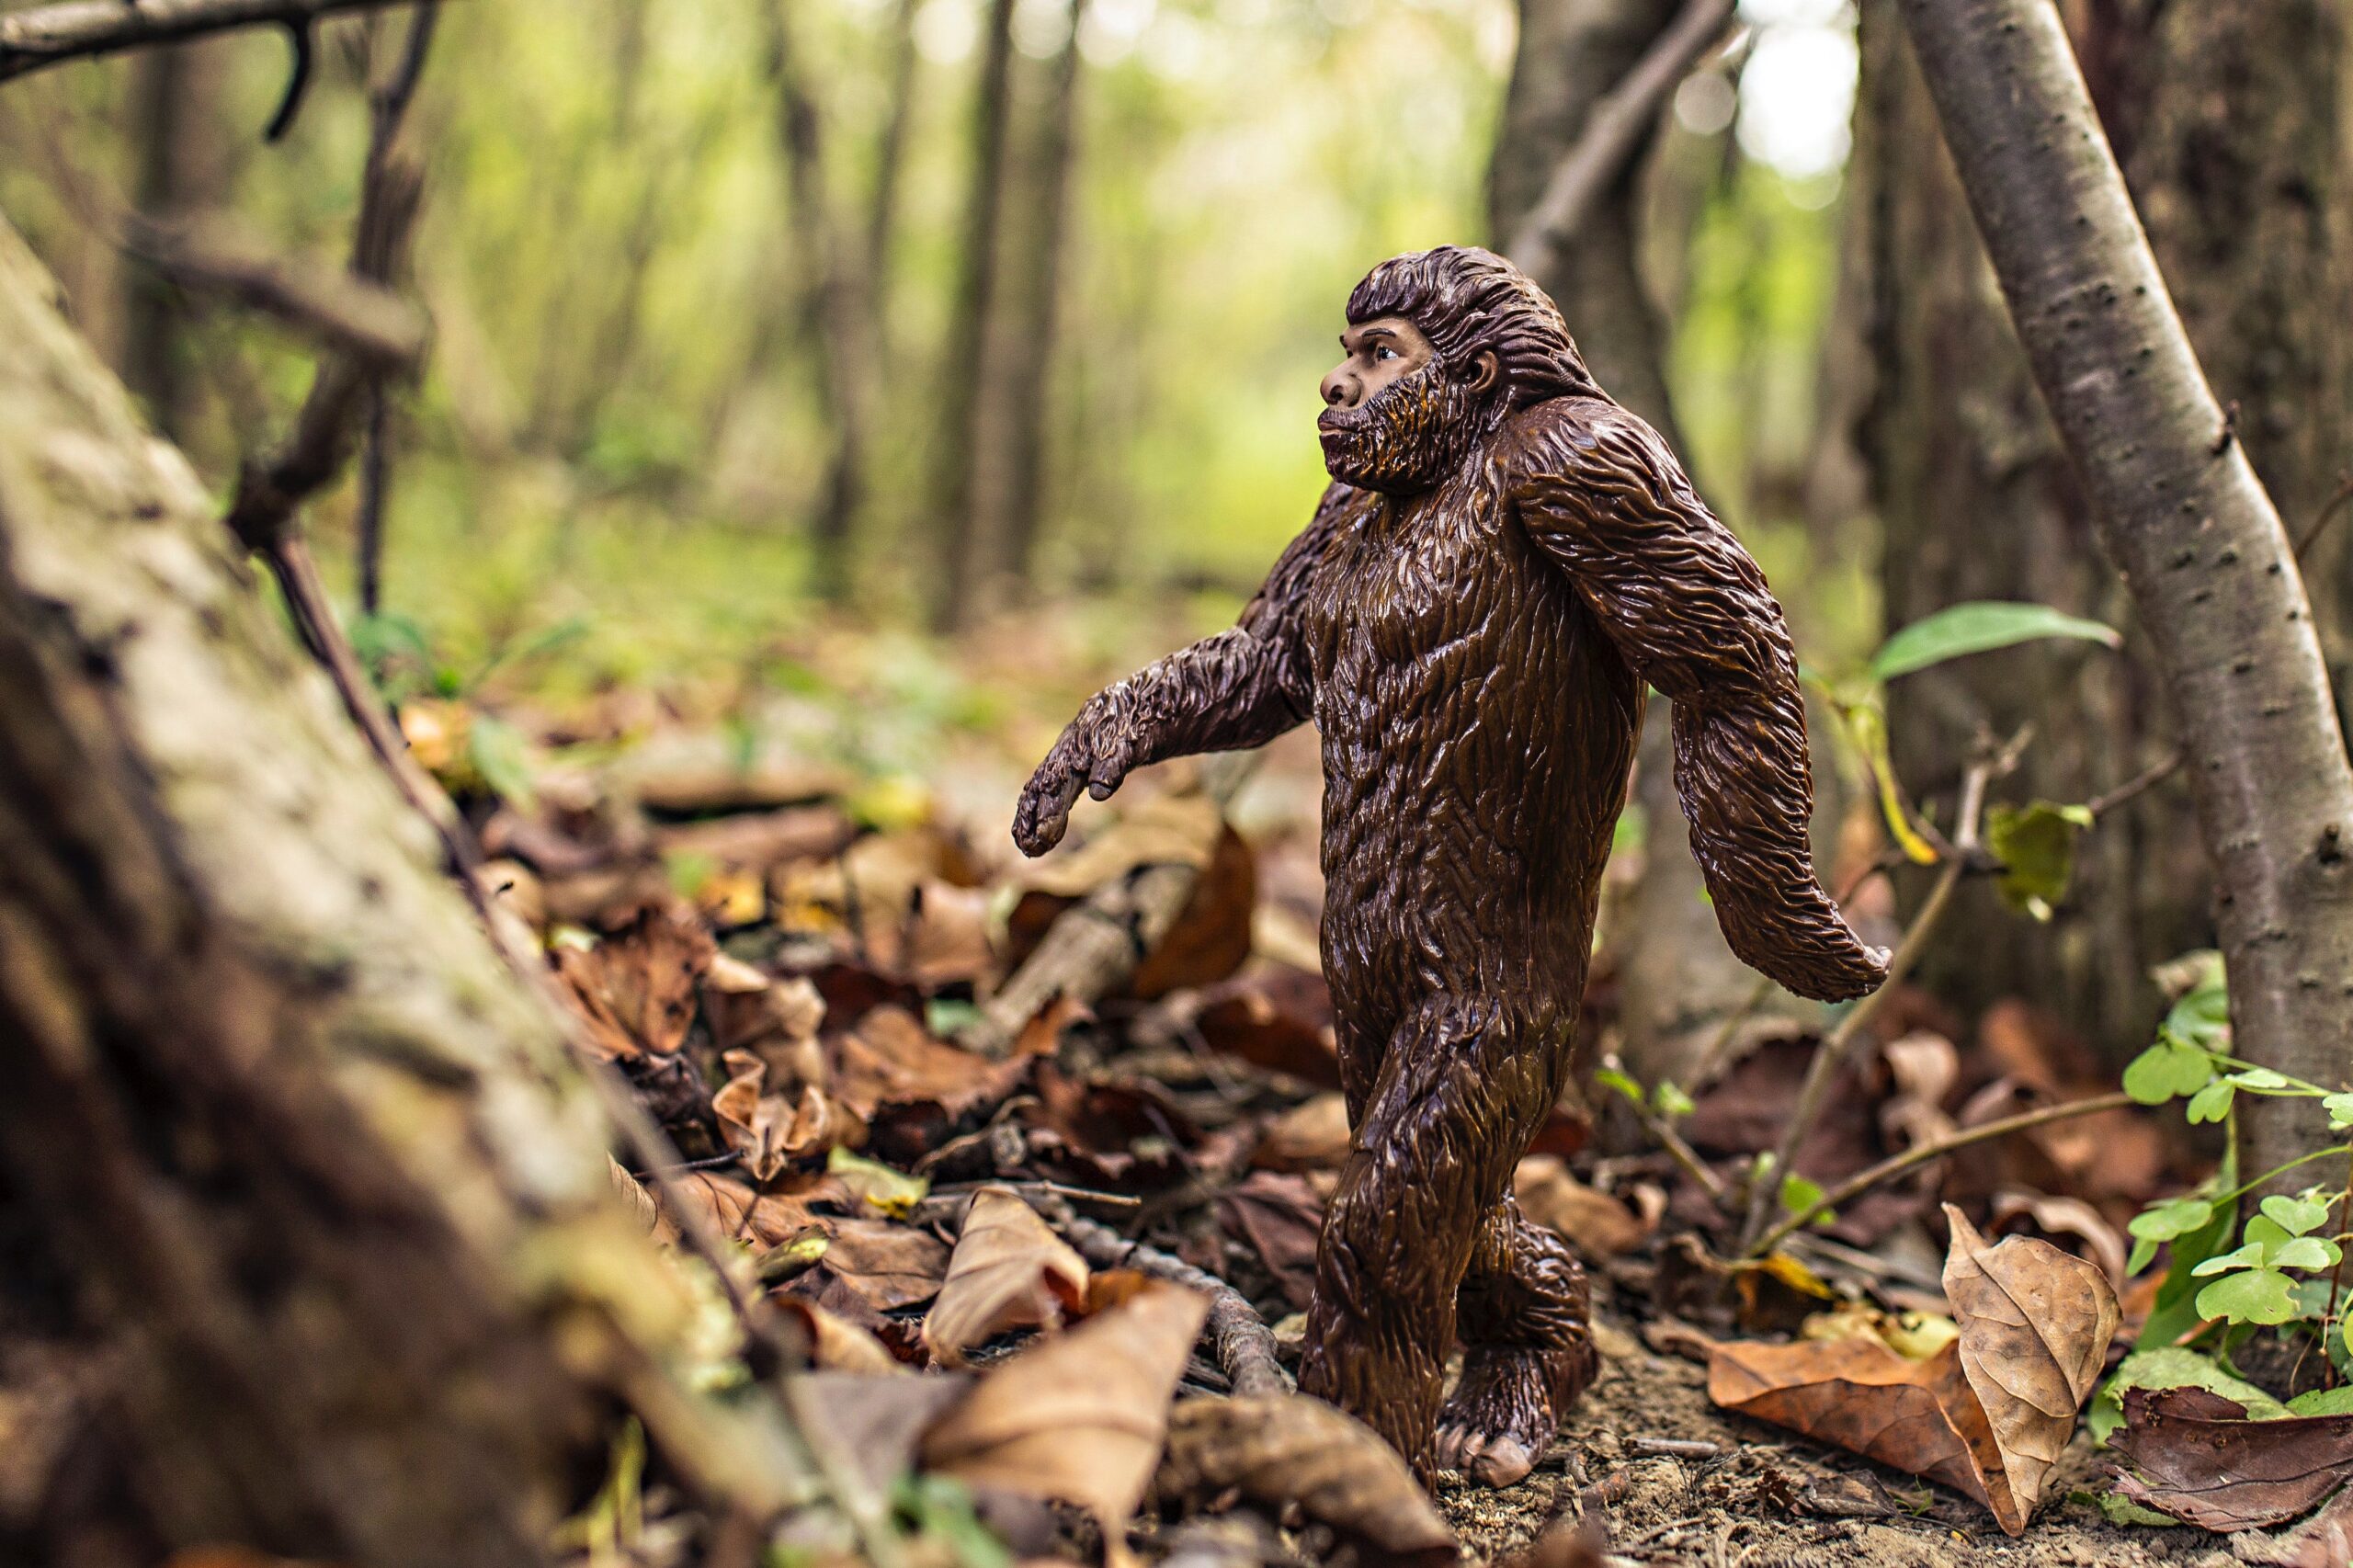 bigfoot toy posed simulating walking in the forest